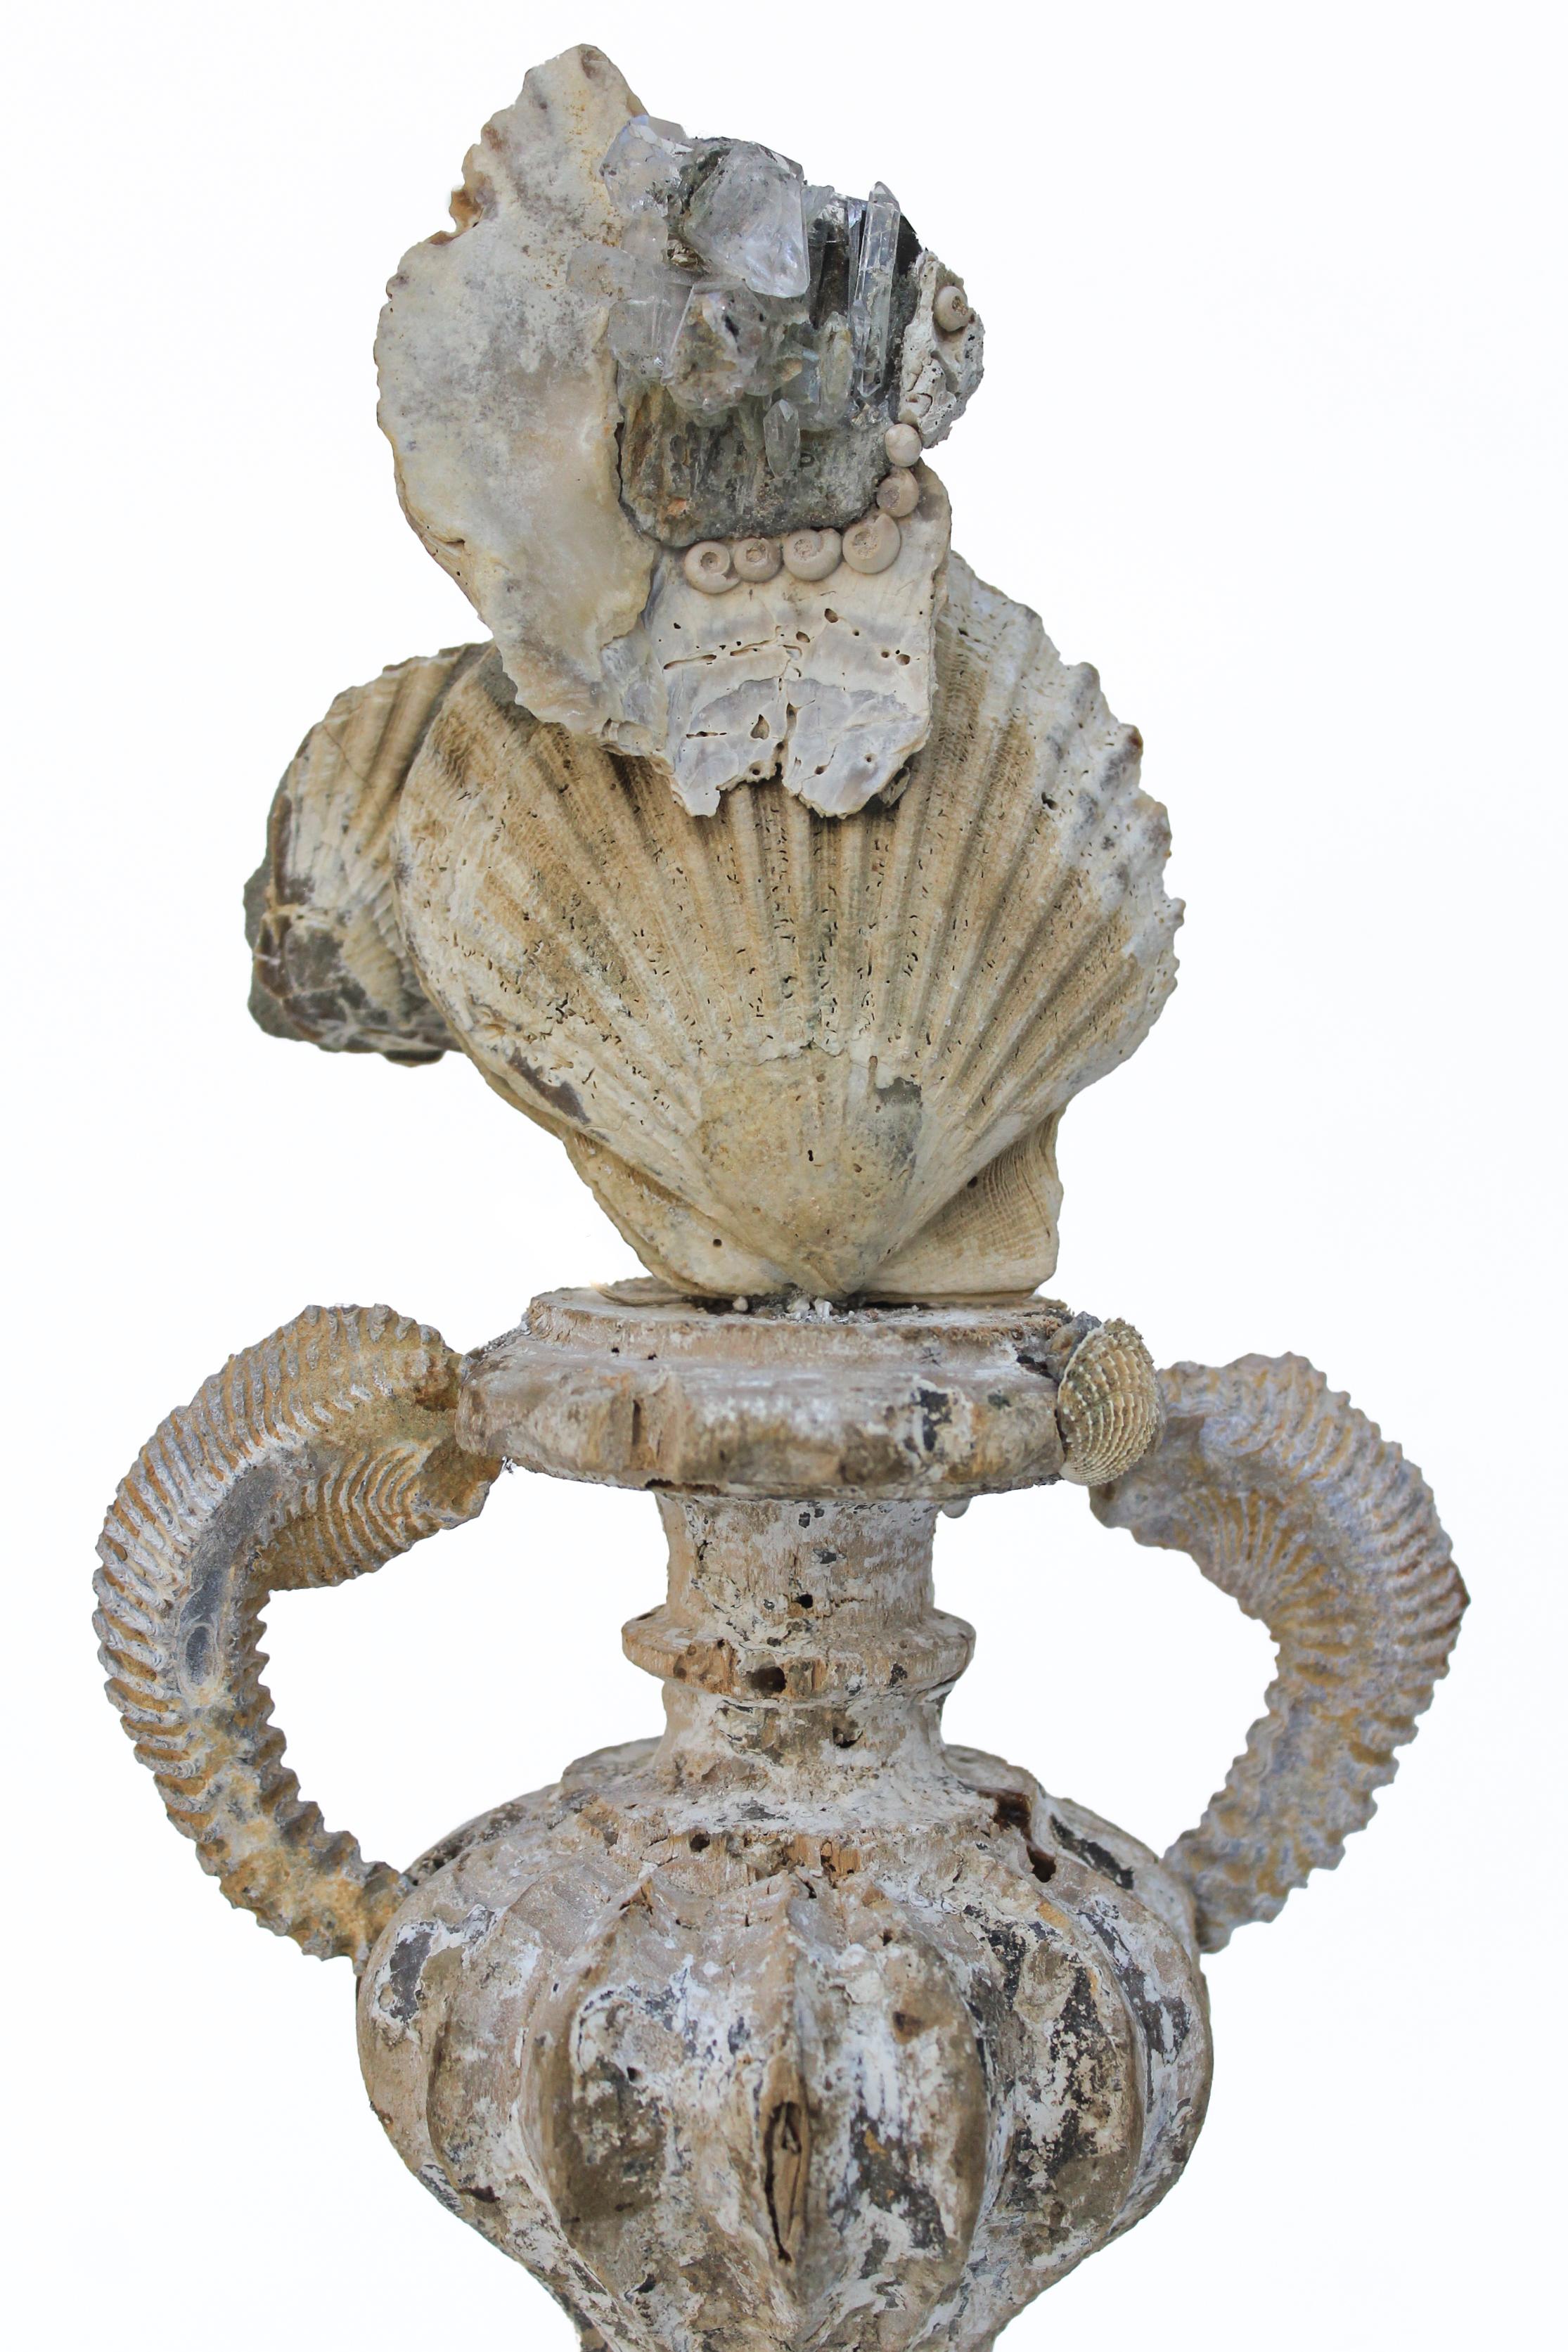 Rococo 18th Century 'Florence Fragment' Vase with Chesapecten Shells & Faden Crystals For Sale